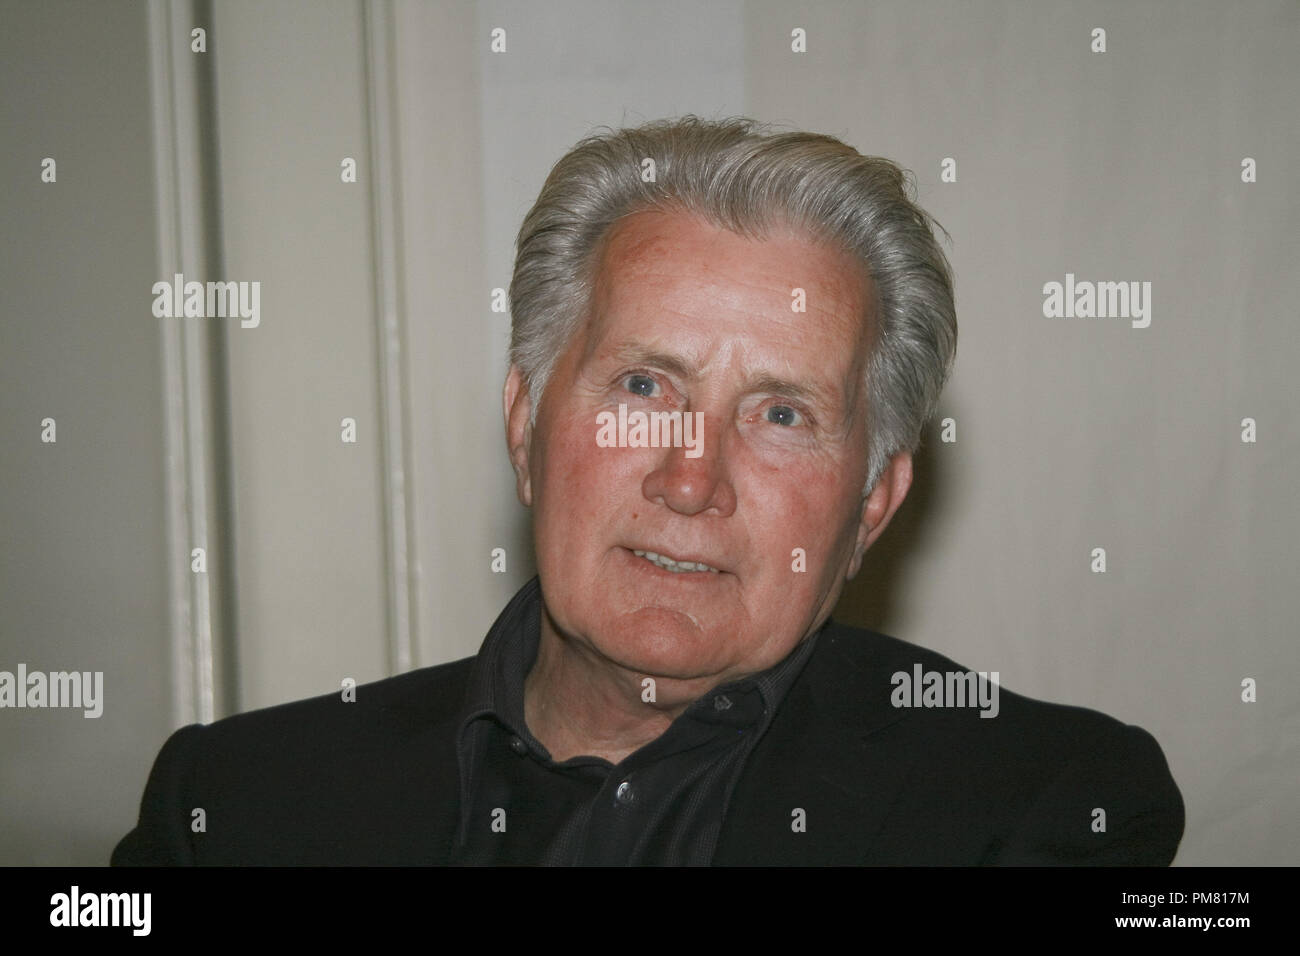 Martin Sheen 'The Way' Portrait Session, November 8, 2011.  Reproduction by American tabloids is absolutely forbidden. File Reference # 31273 008JRC  For Editorial Use Only -  All Rights Reserved Stock Photo